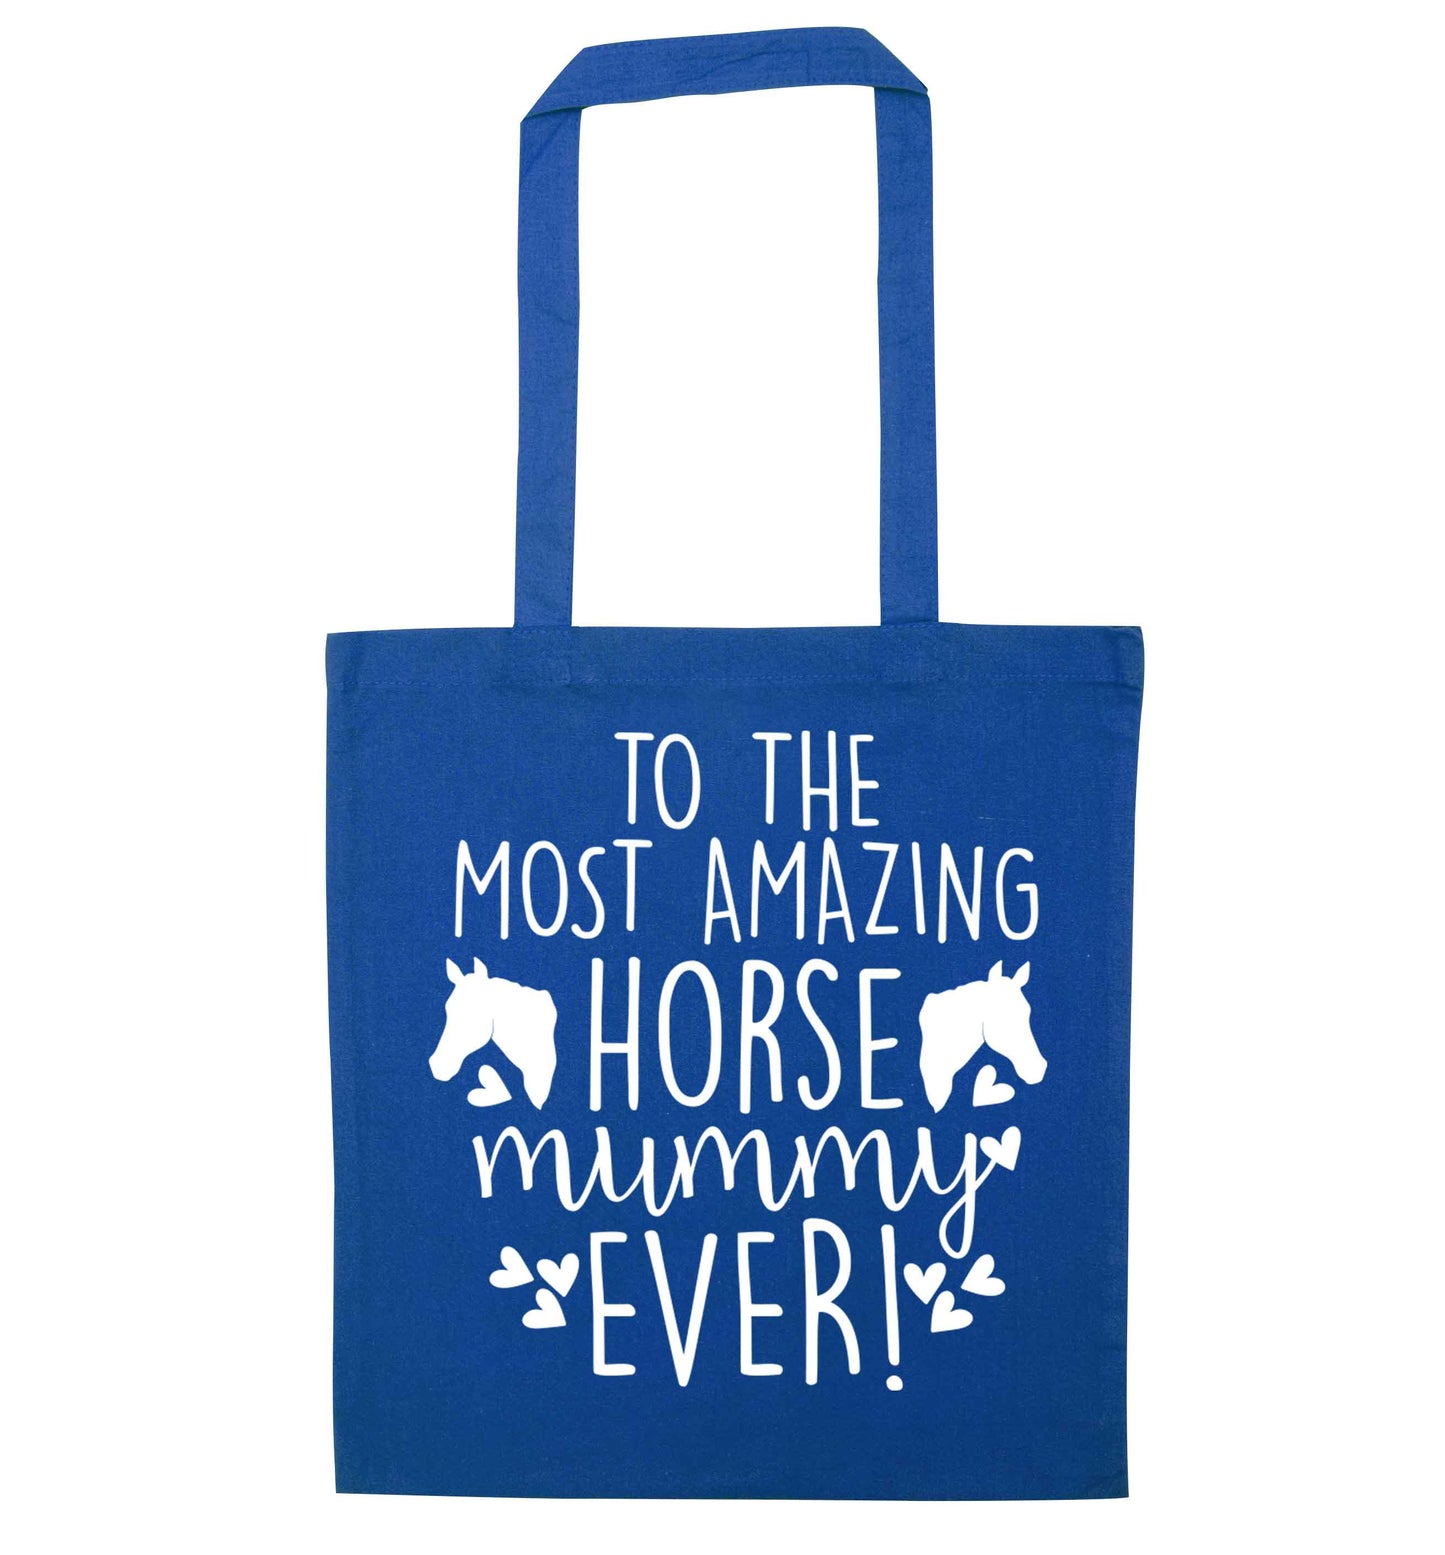 To the most amazing horse mummy ever! blue tote bag